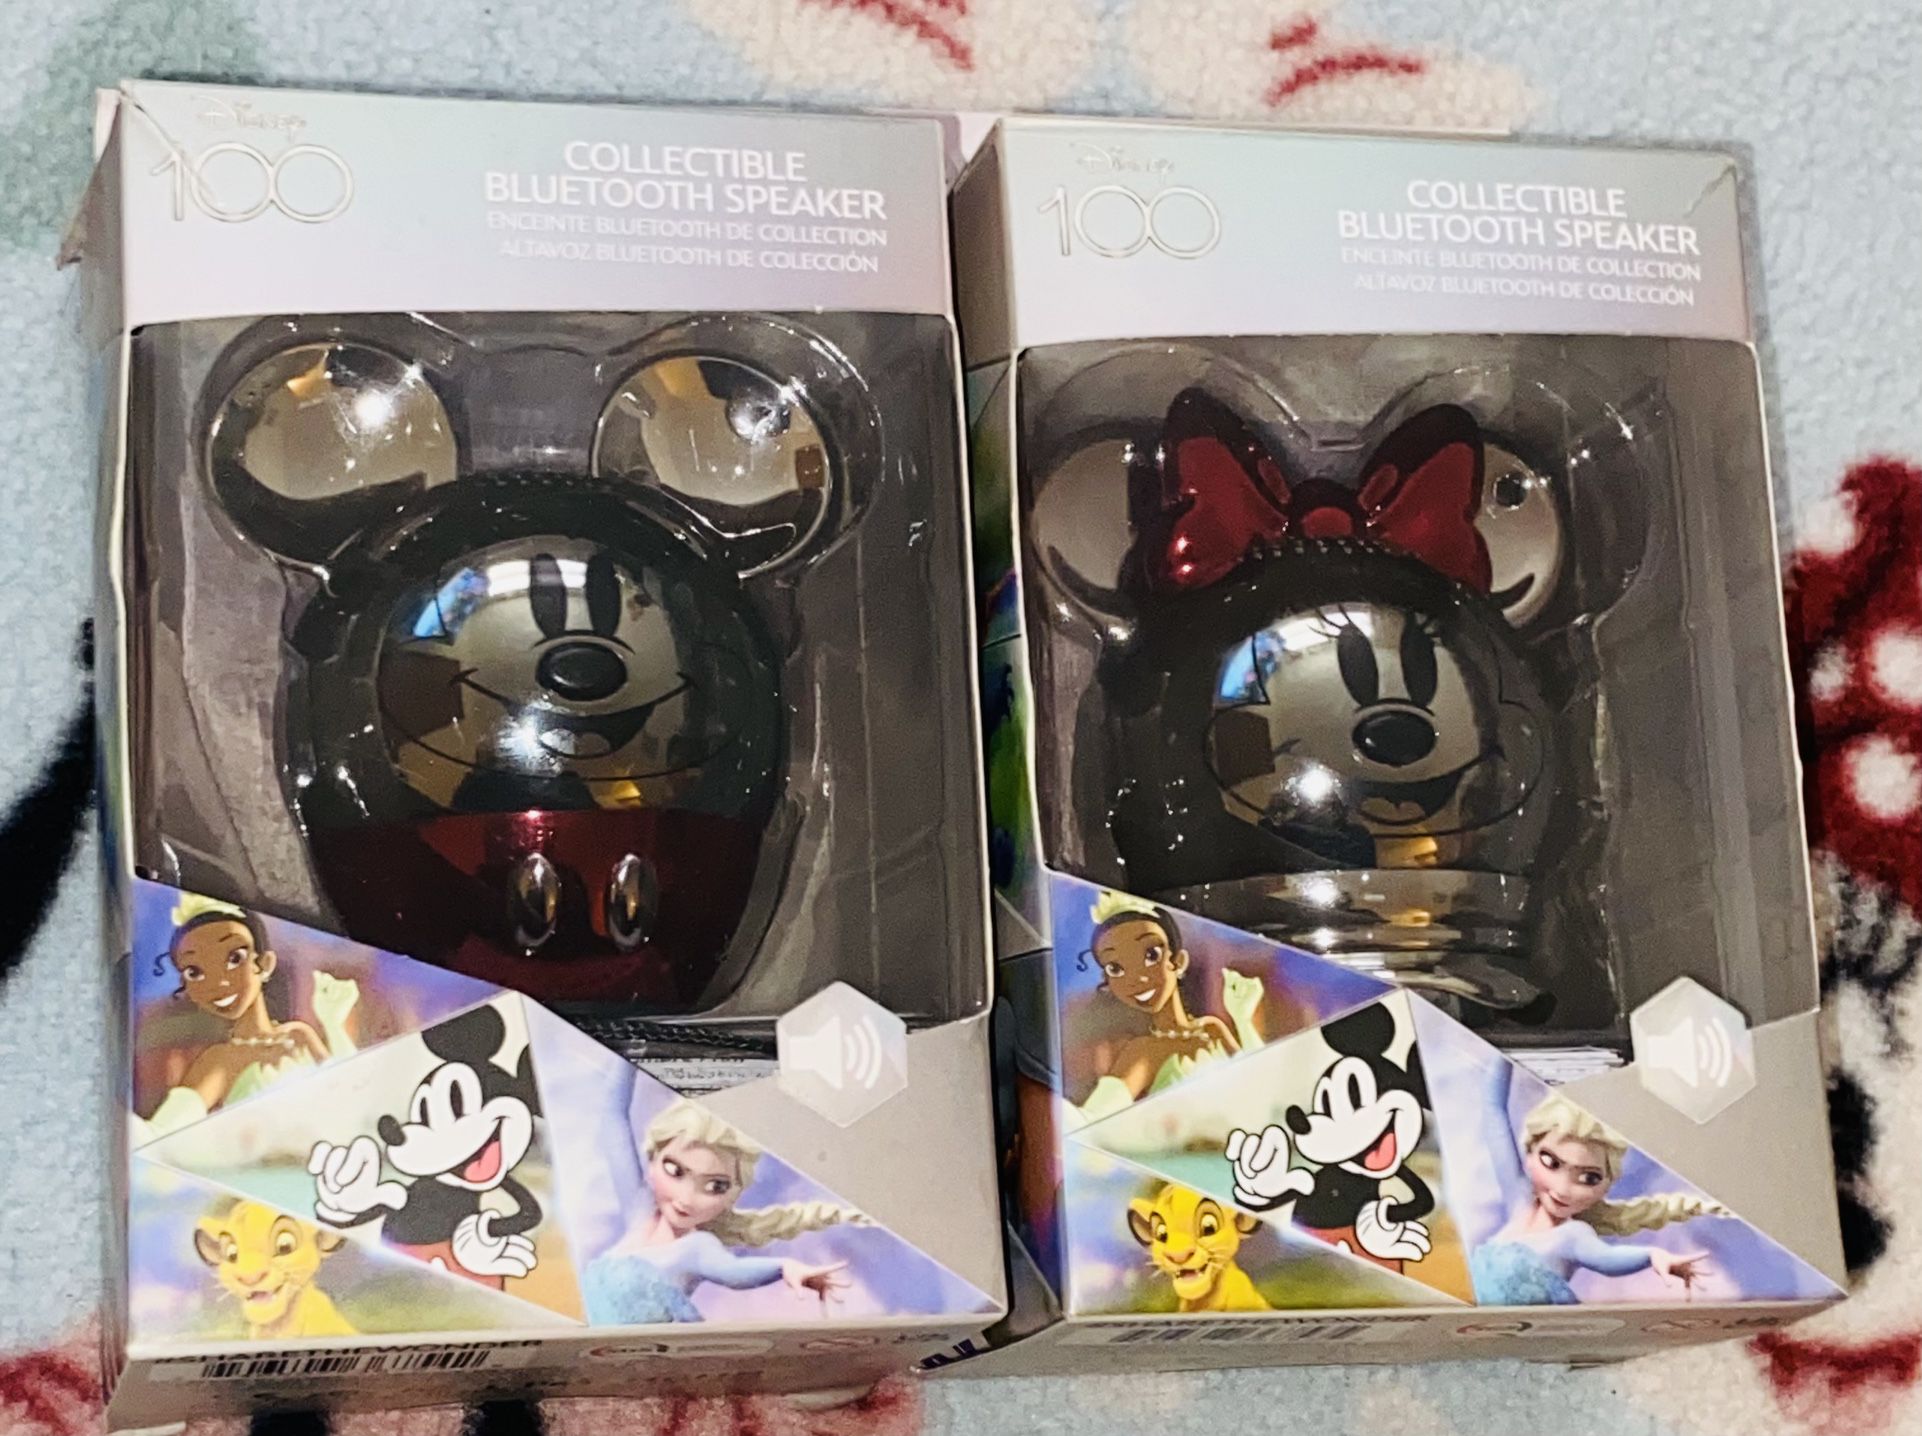 2 SET/🪩🎼🔴🐭🔊⚫️✨DISNEY MICKEY MOUSE🐭&MINNIE MOUSE🐭PORTABLE BLUETOOTH SPEAKERS🔴🎼🔊🪩🐭⚫️✨